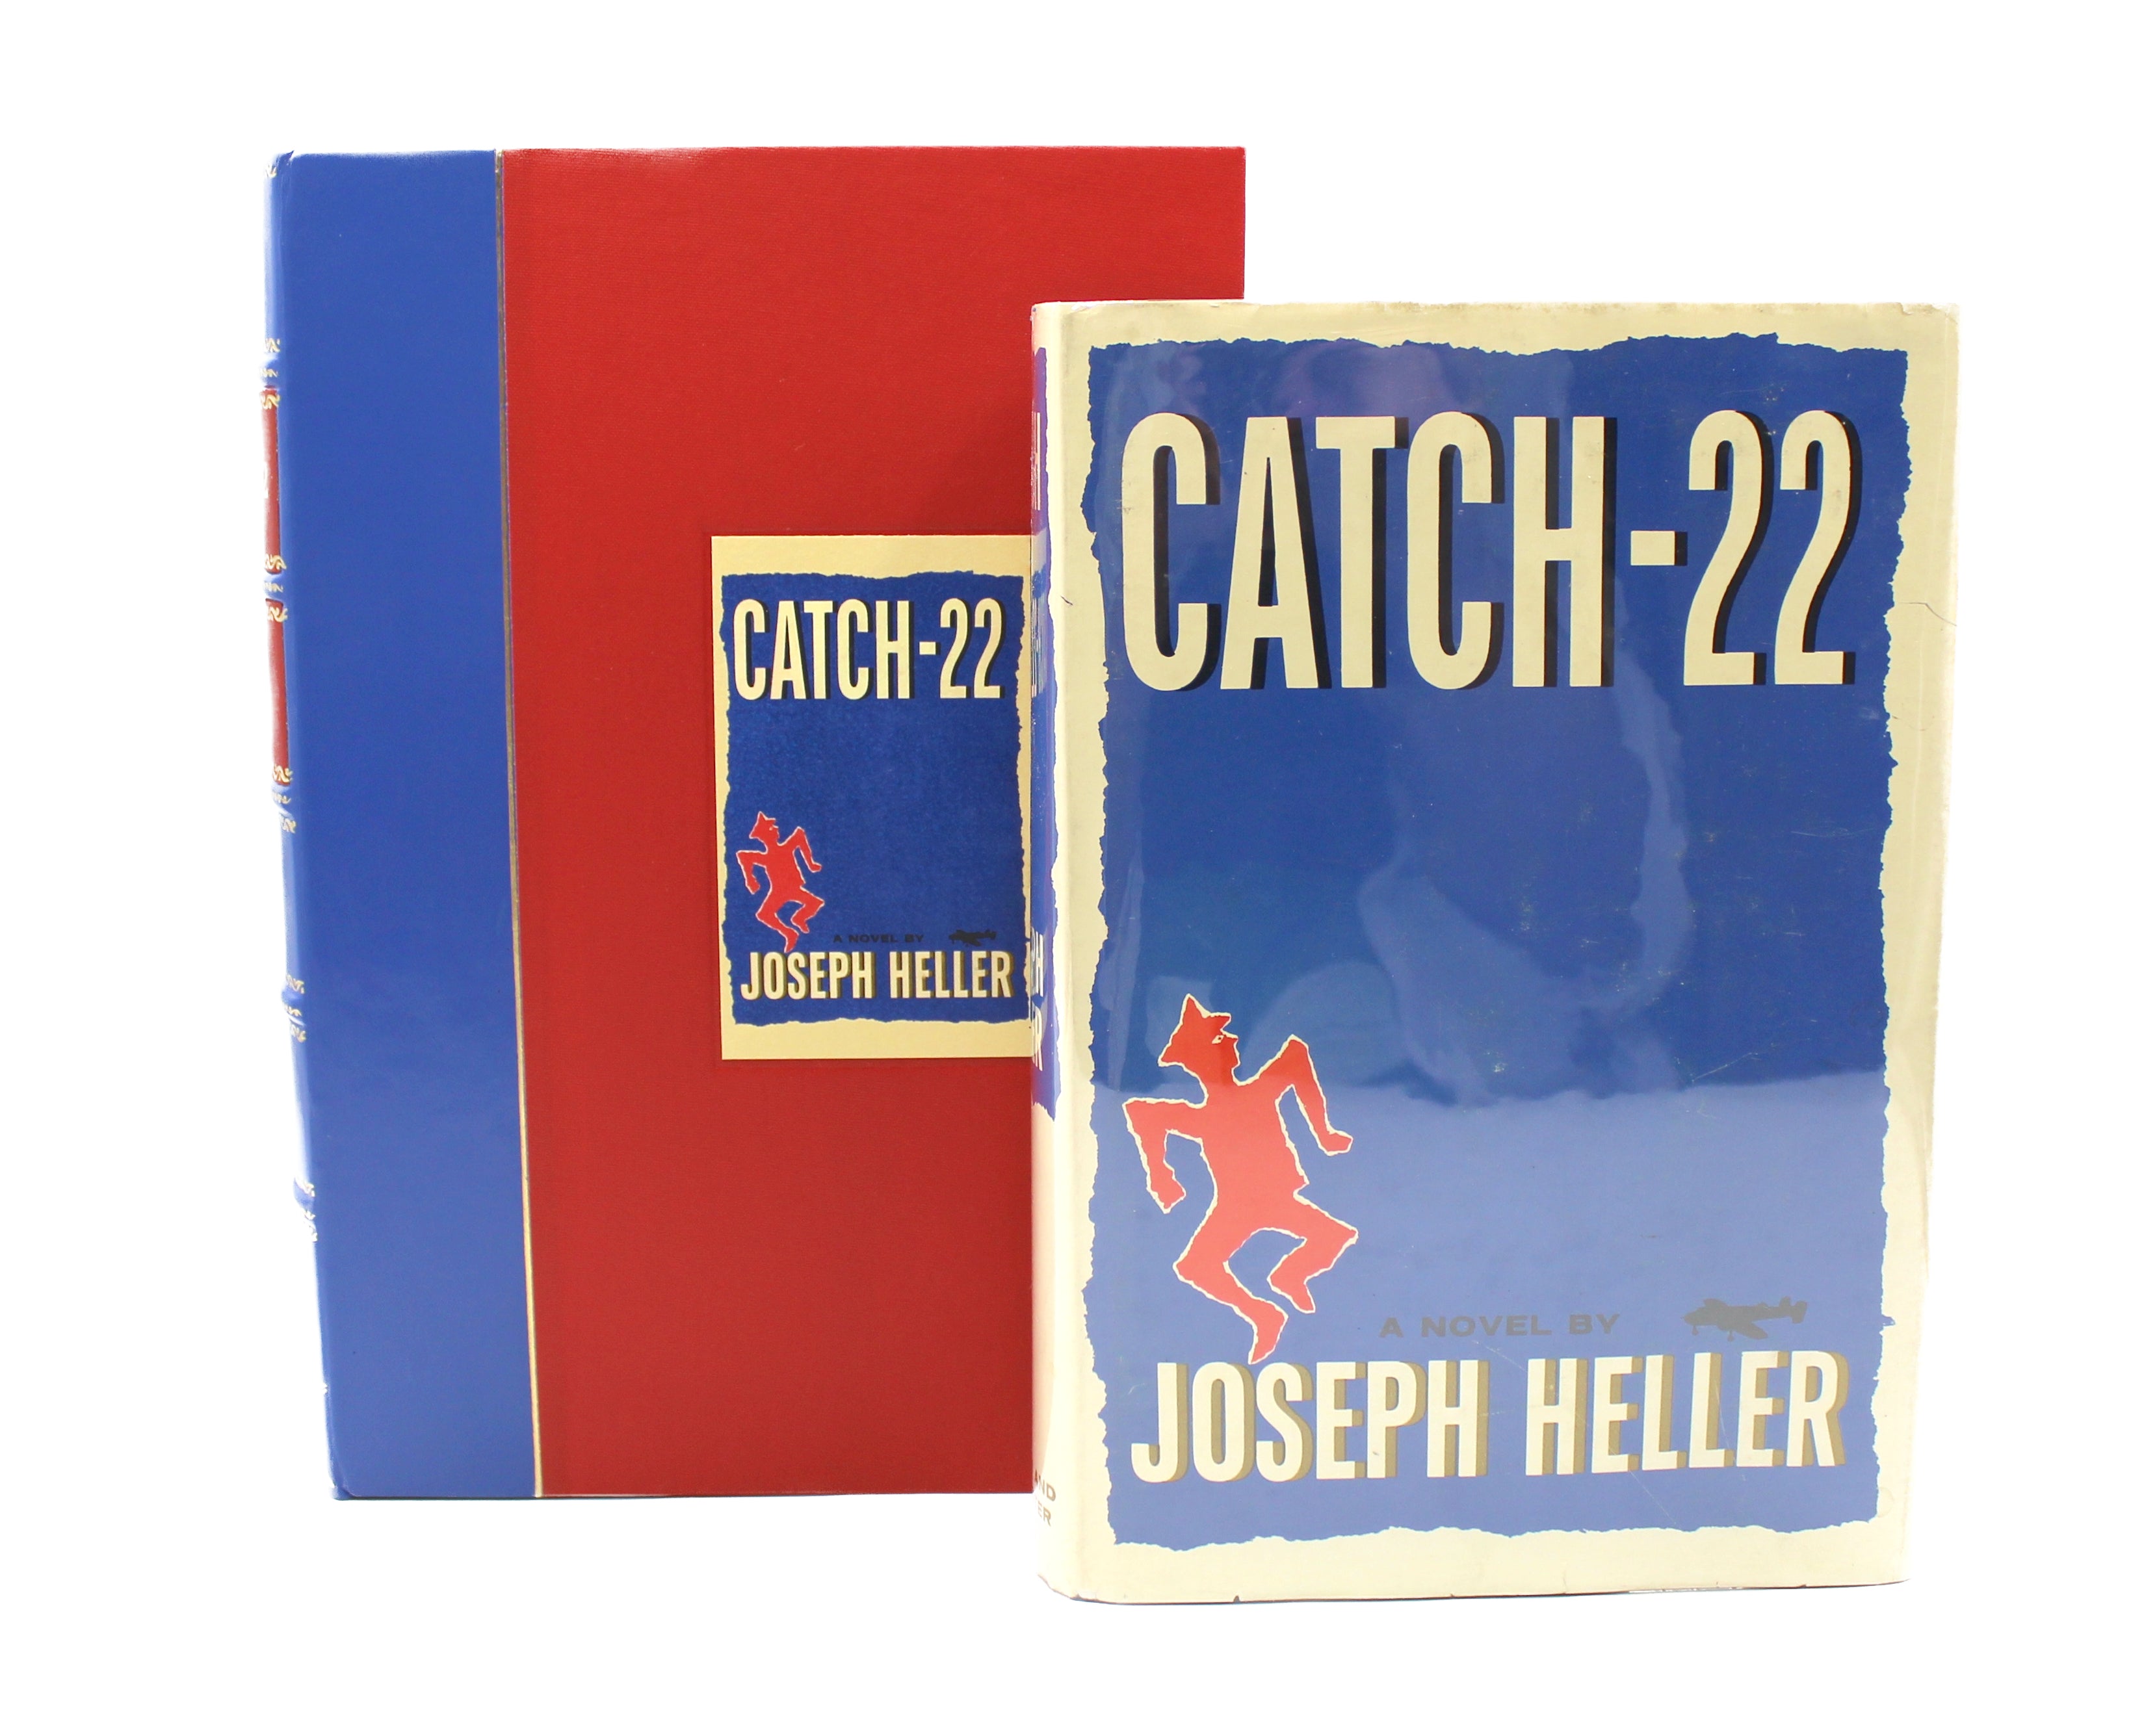 Catch-22 by Joseph Heller, First Edition, First Printing, in